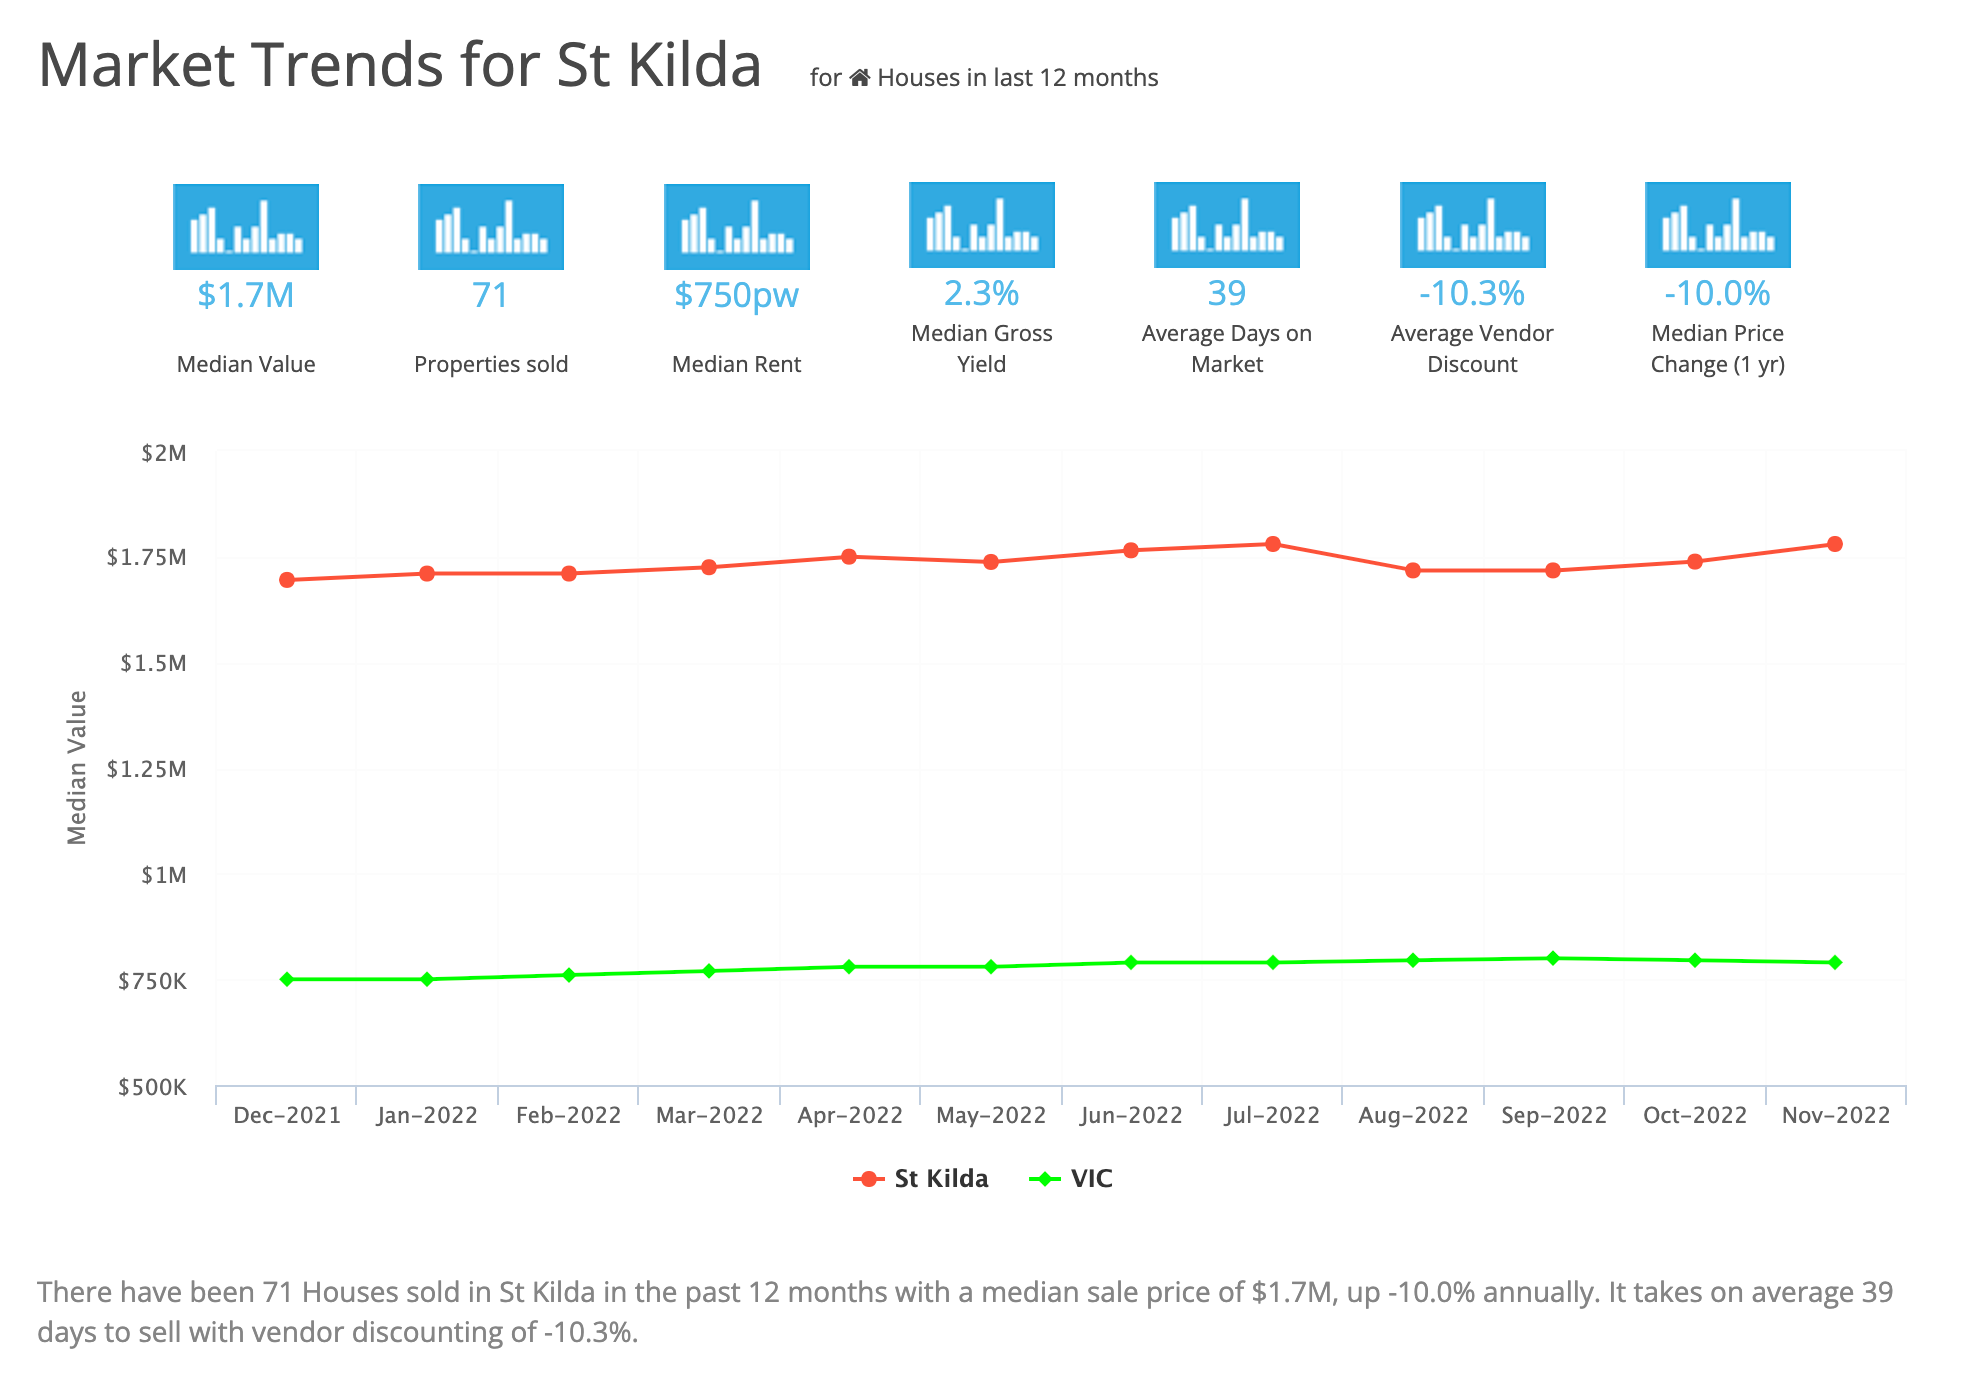 Market Trends for St Kilda March 2023